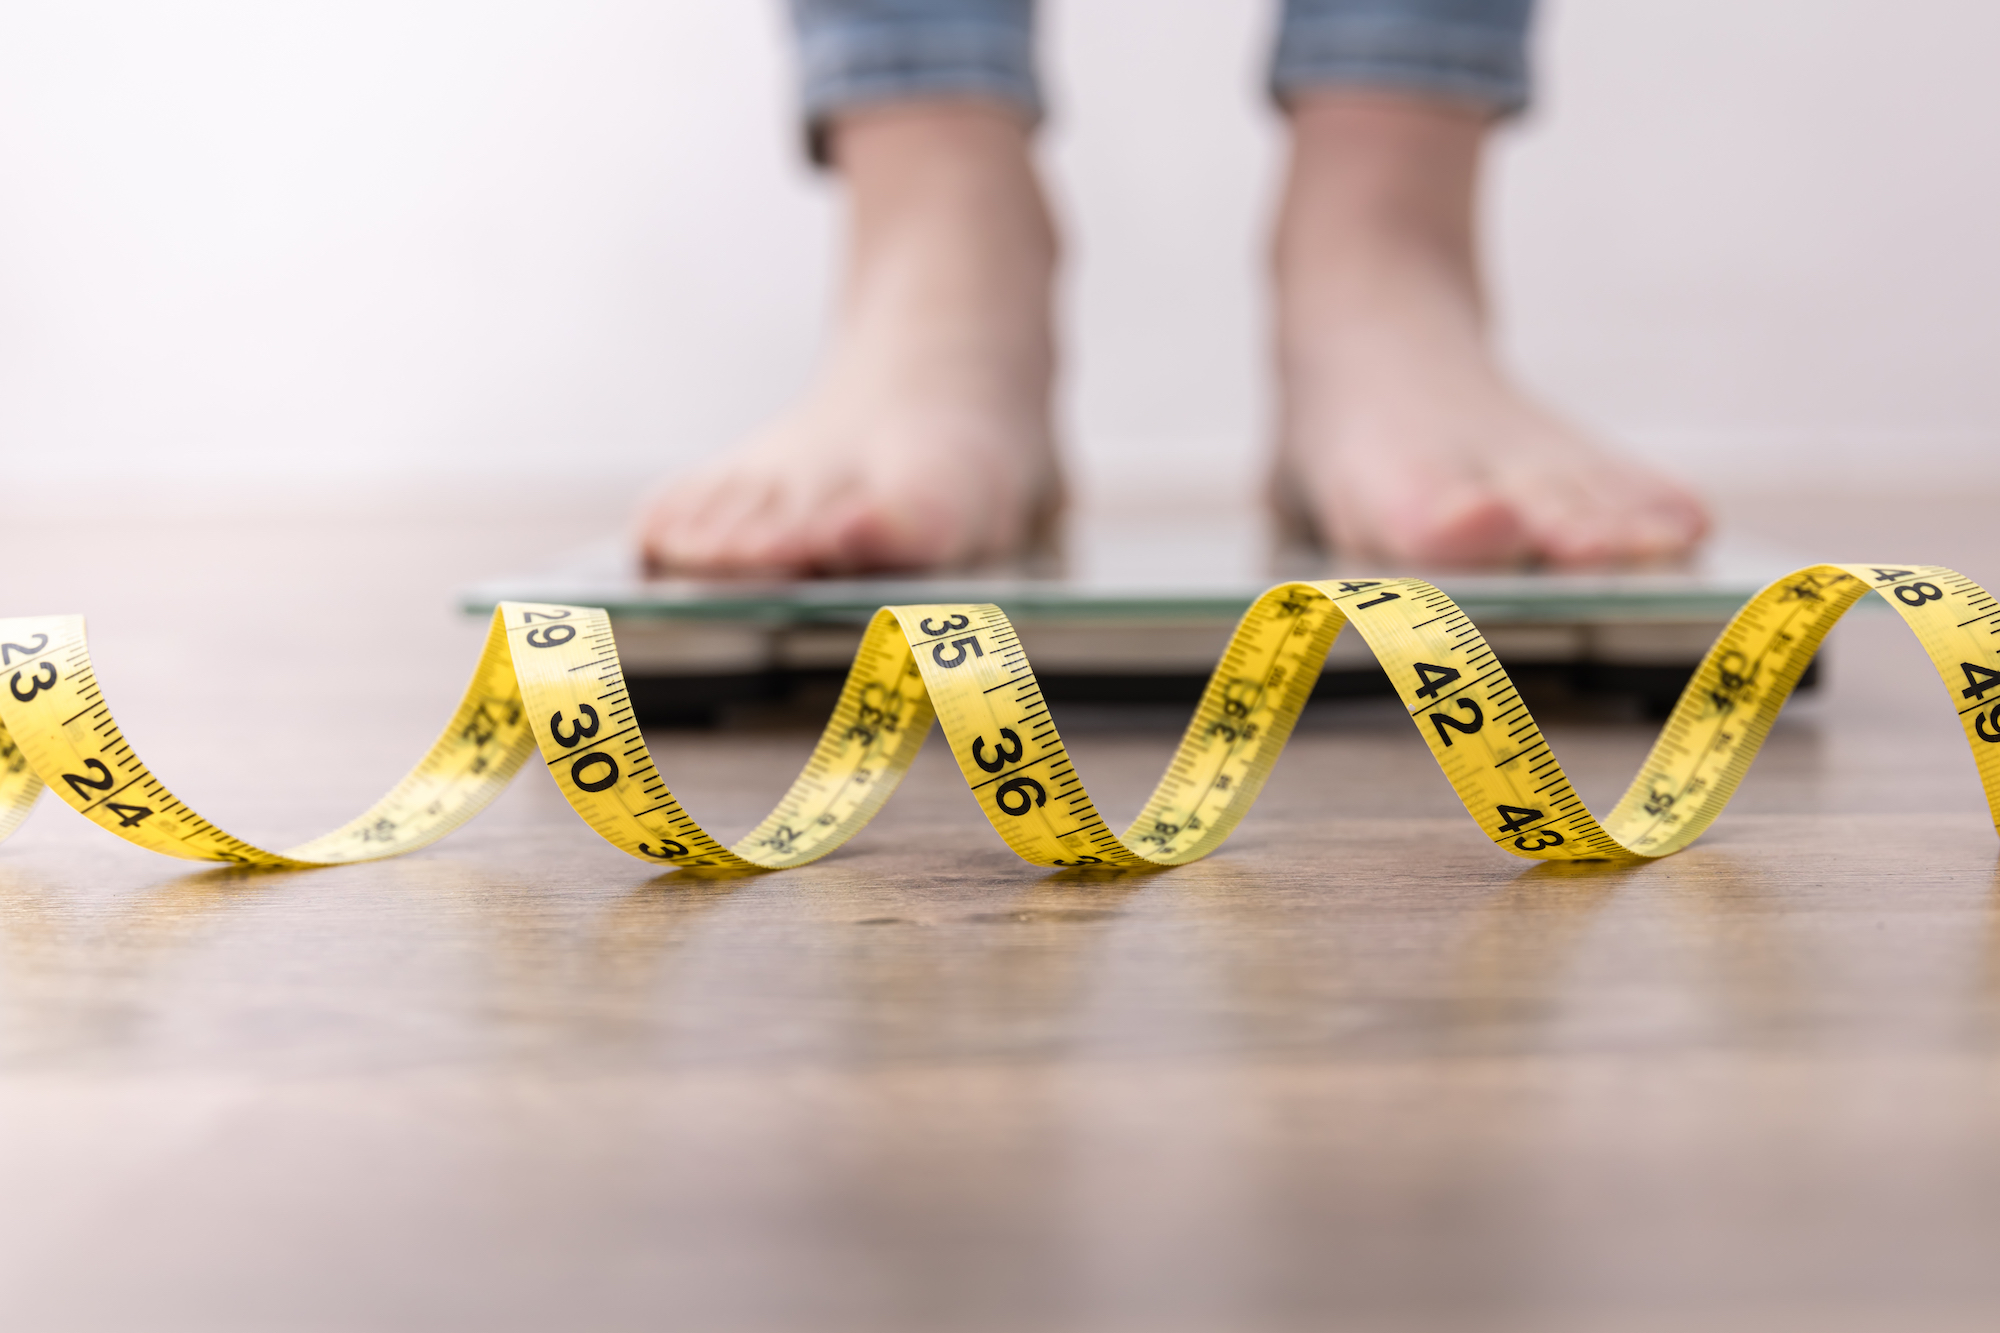 Ozempic and Similar Drugs for Weight Loss- Should You, or Shouldn't You? :  Chesapeake Weight Loss: Weight Loss Centers